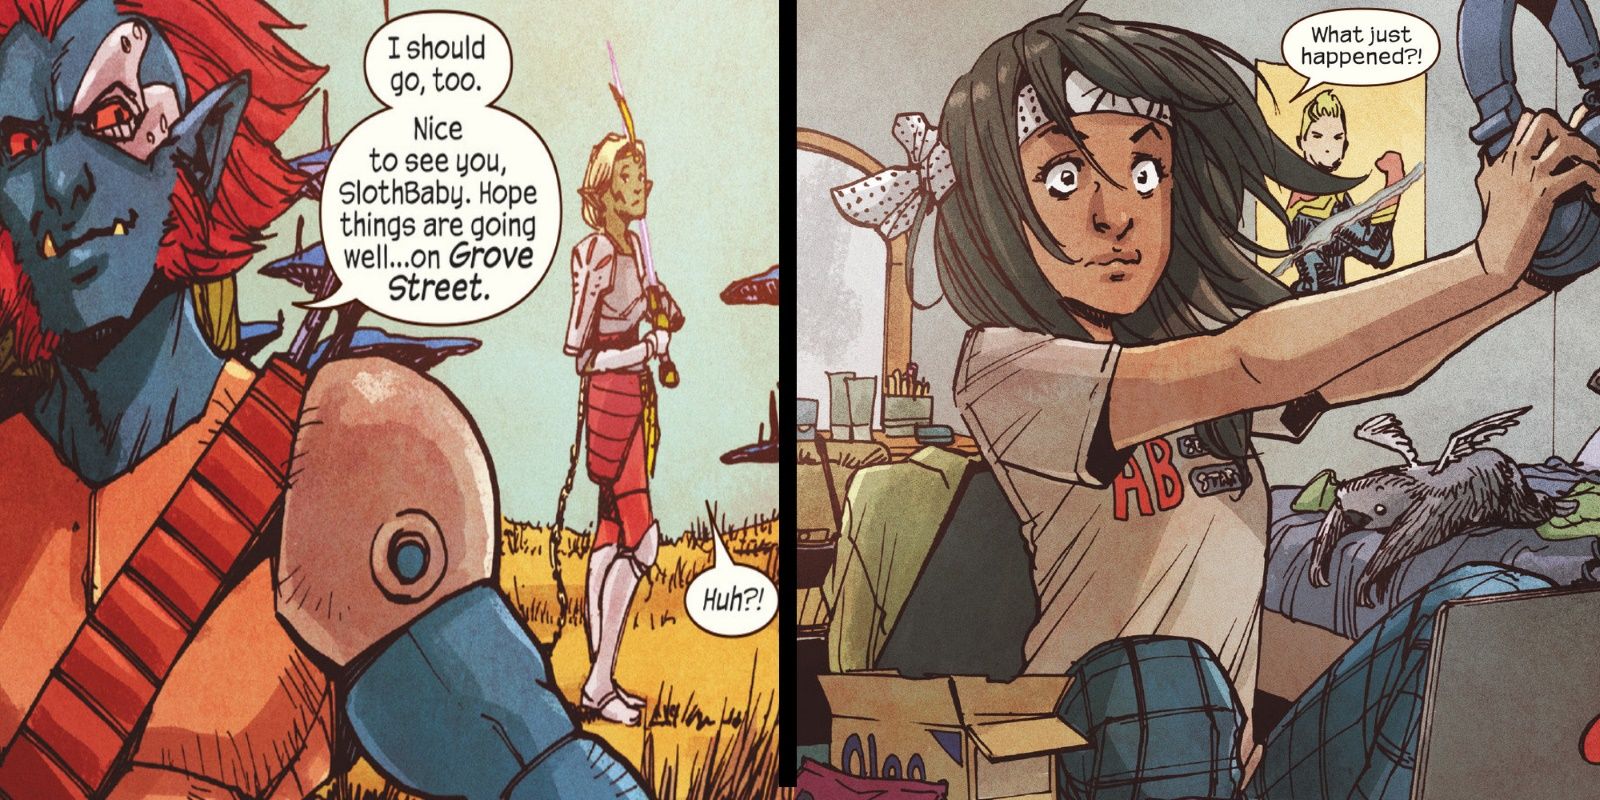 Ms. Marvel Just Fought the Ultimate Internet Troll